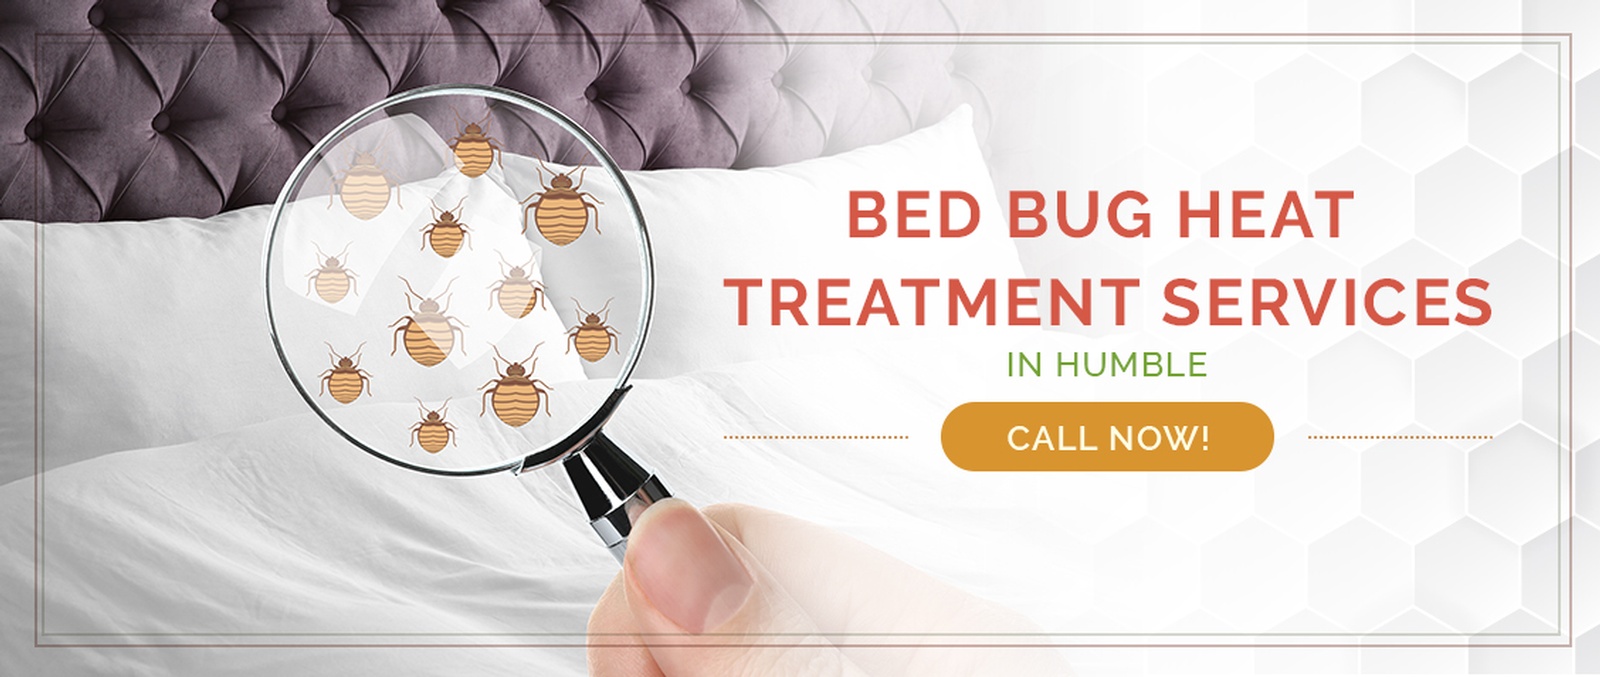 Humble Bed Bug Treatment / Heater Rental Services by Houston Bed Bug Heaters